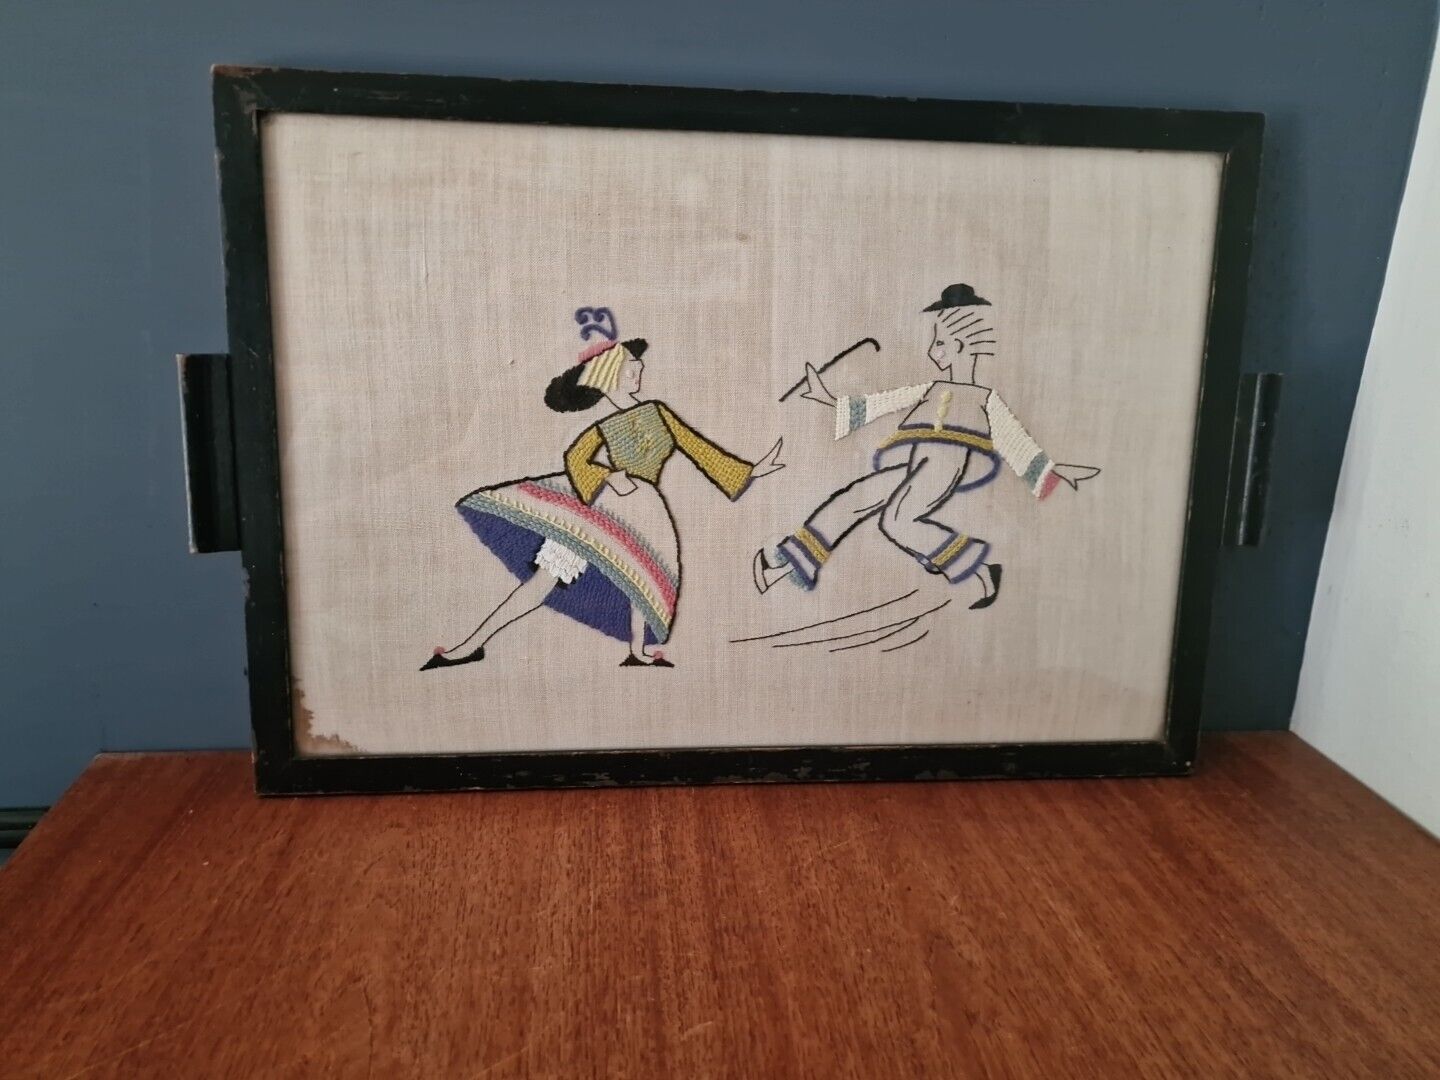 VINTAGE GLASS TOPPED TRAY, WITH EMBROIDERY CROSSTICH FOLK ART DANCING EBONISED 